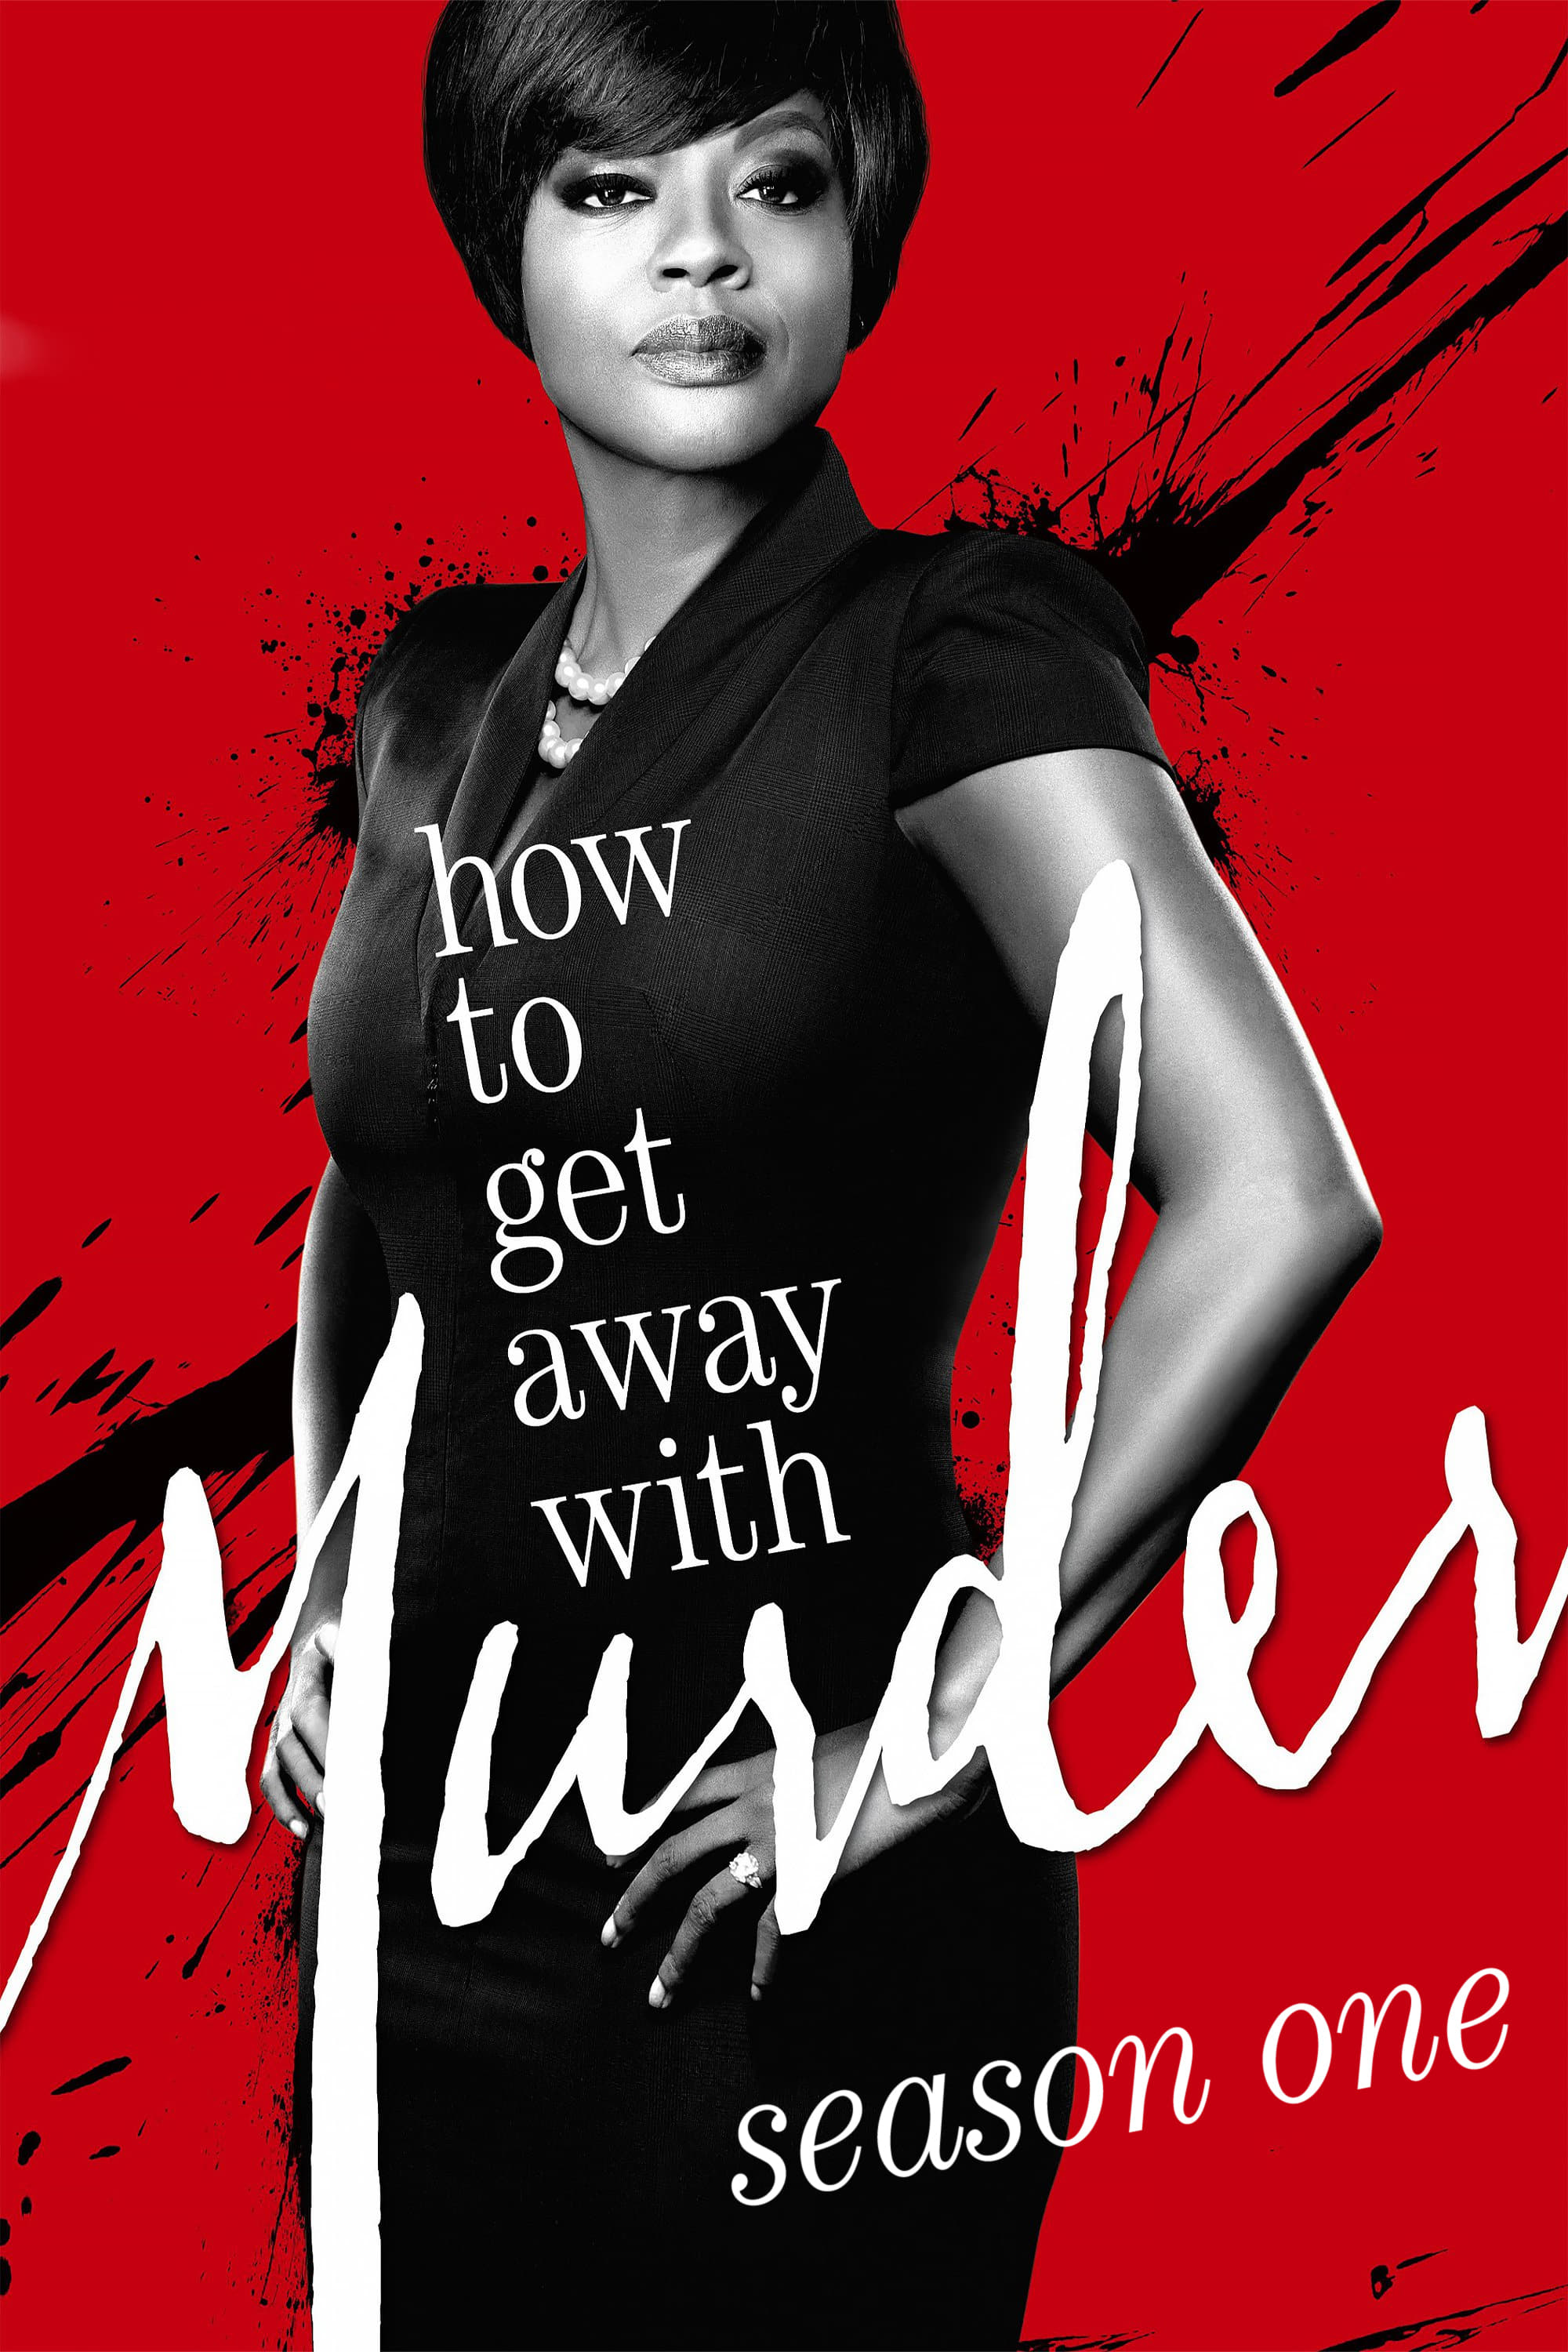 How to Get Away with Murder Season 1